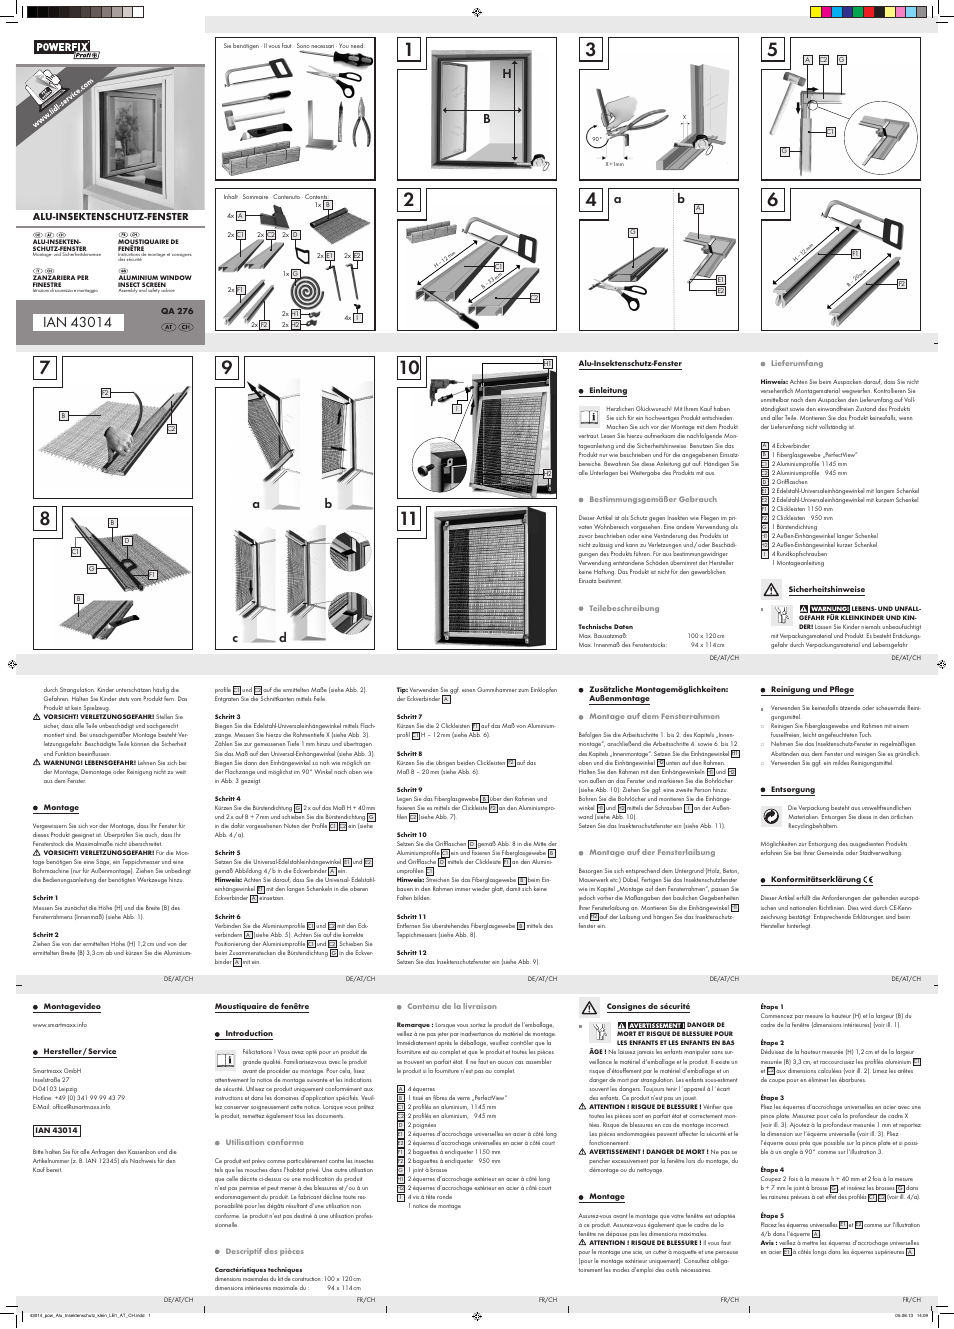 Powerfix Aluminium Window Insect Screen User Manual | 2 pages